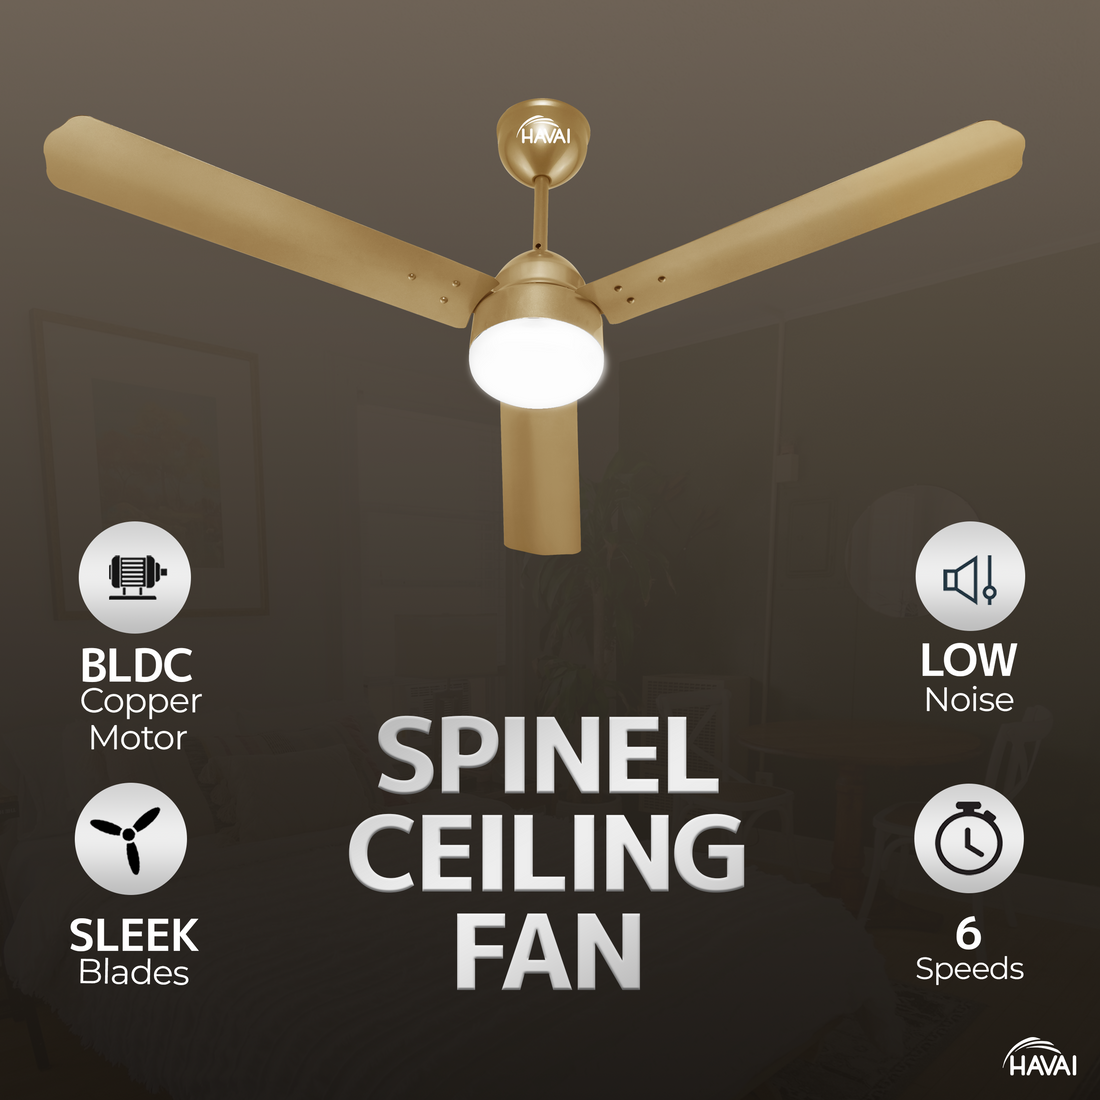 HAVAI Spinel BLDC Ceiling Fan 28W, 1200mm Blade with Remote - Champagne Yellow, 0.5W LED